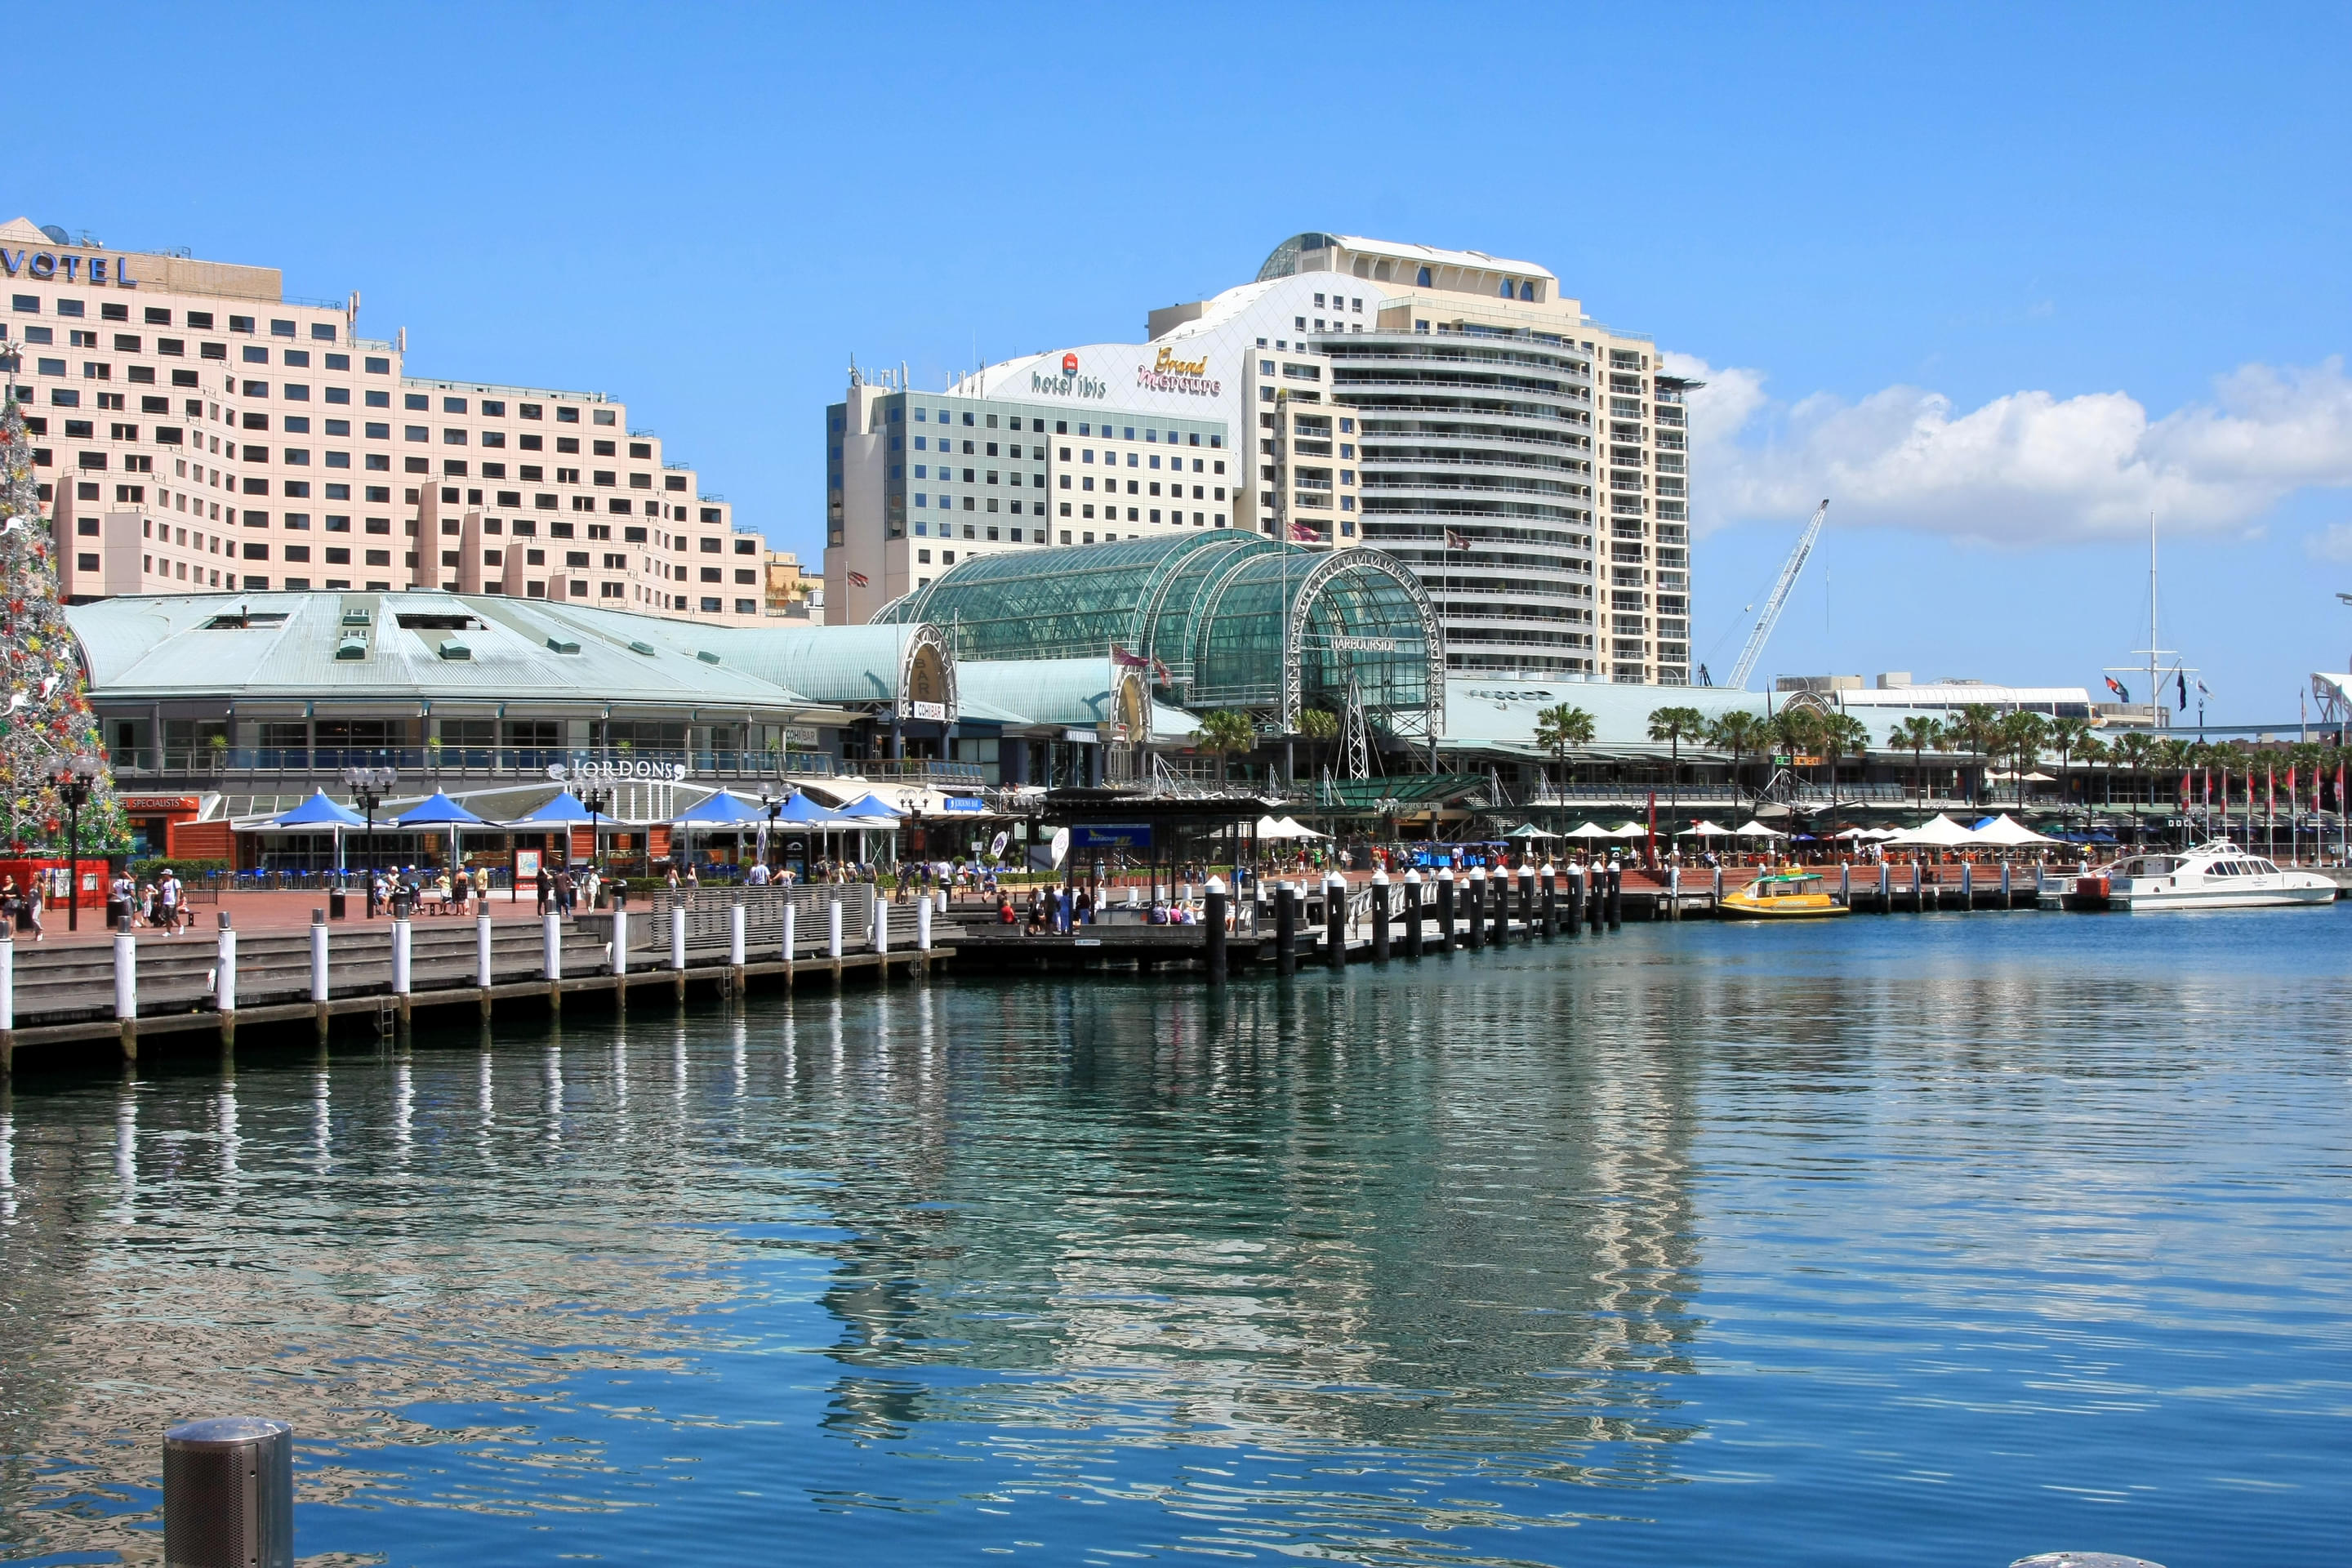 Harbourside Shopping Centre Overview